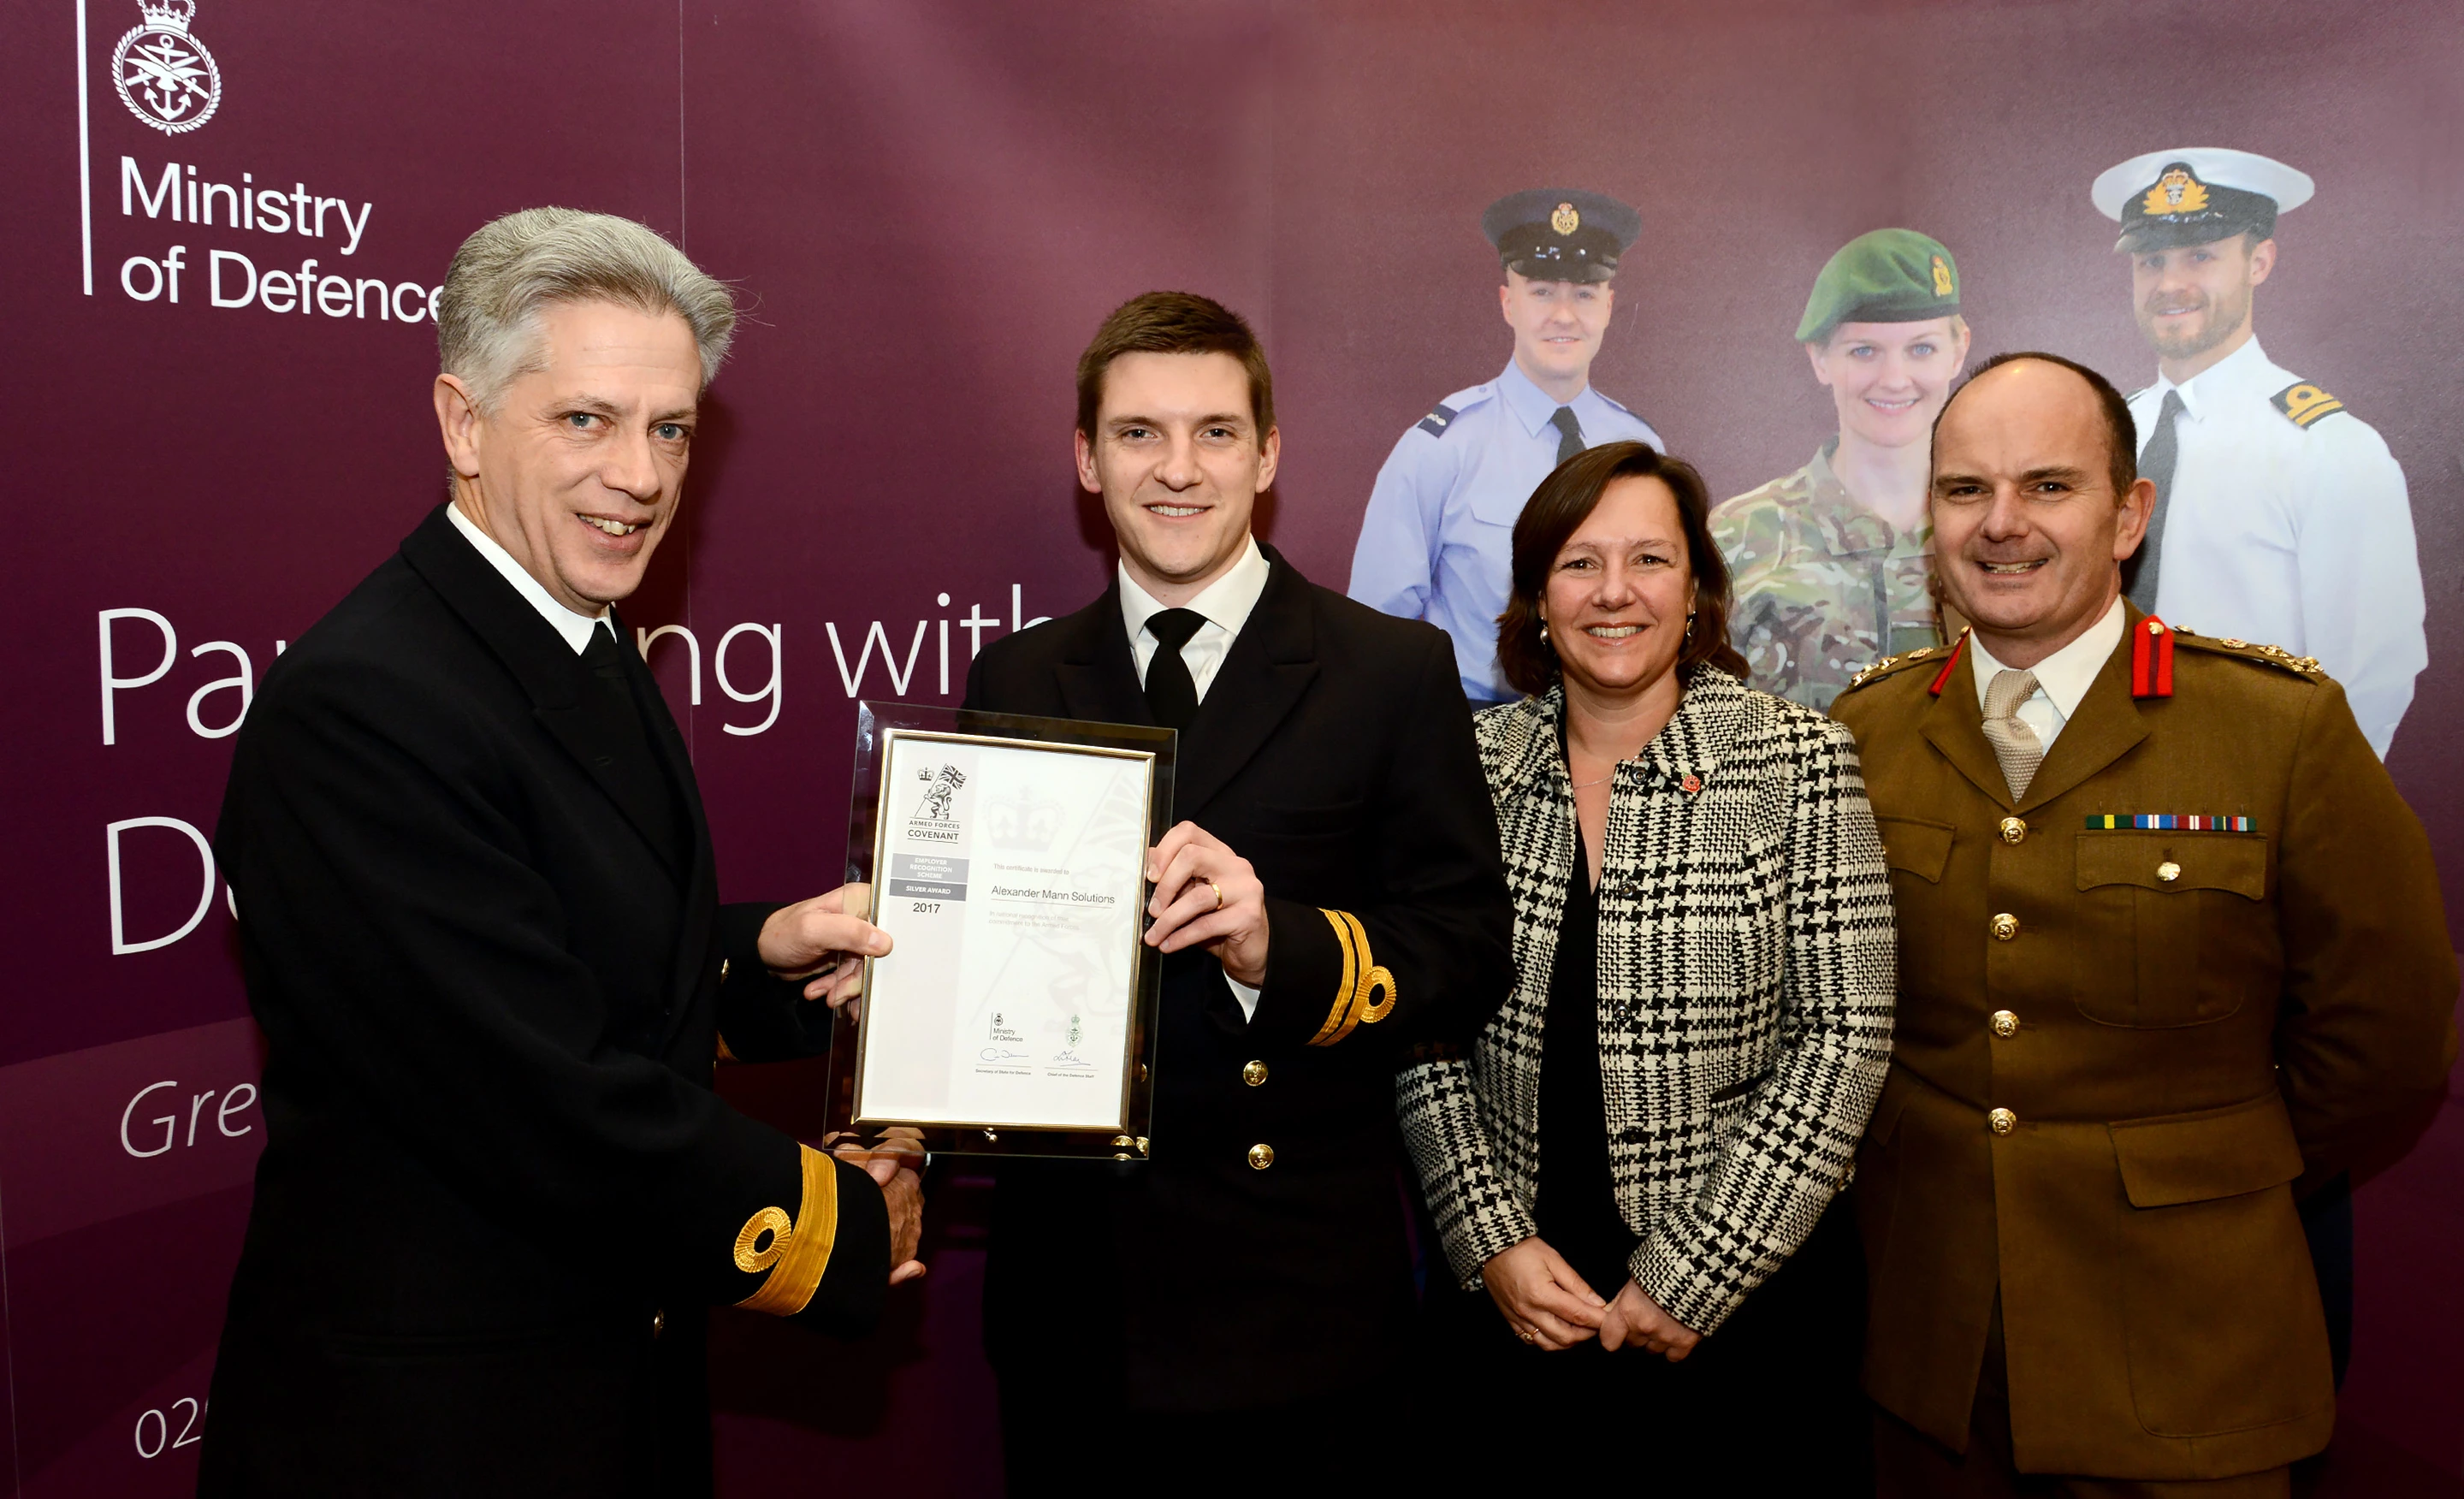 From left to right, David Elford RN, Commodore, Oliver Holland RNR, Lieutenant and Recruitment Manager at Alexander Mann Solutions, Lucy Wood, Head of Client services and ex-Artillery Officer, and Marc Overton, Brigadier